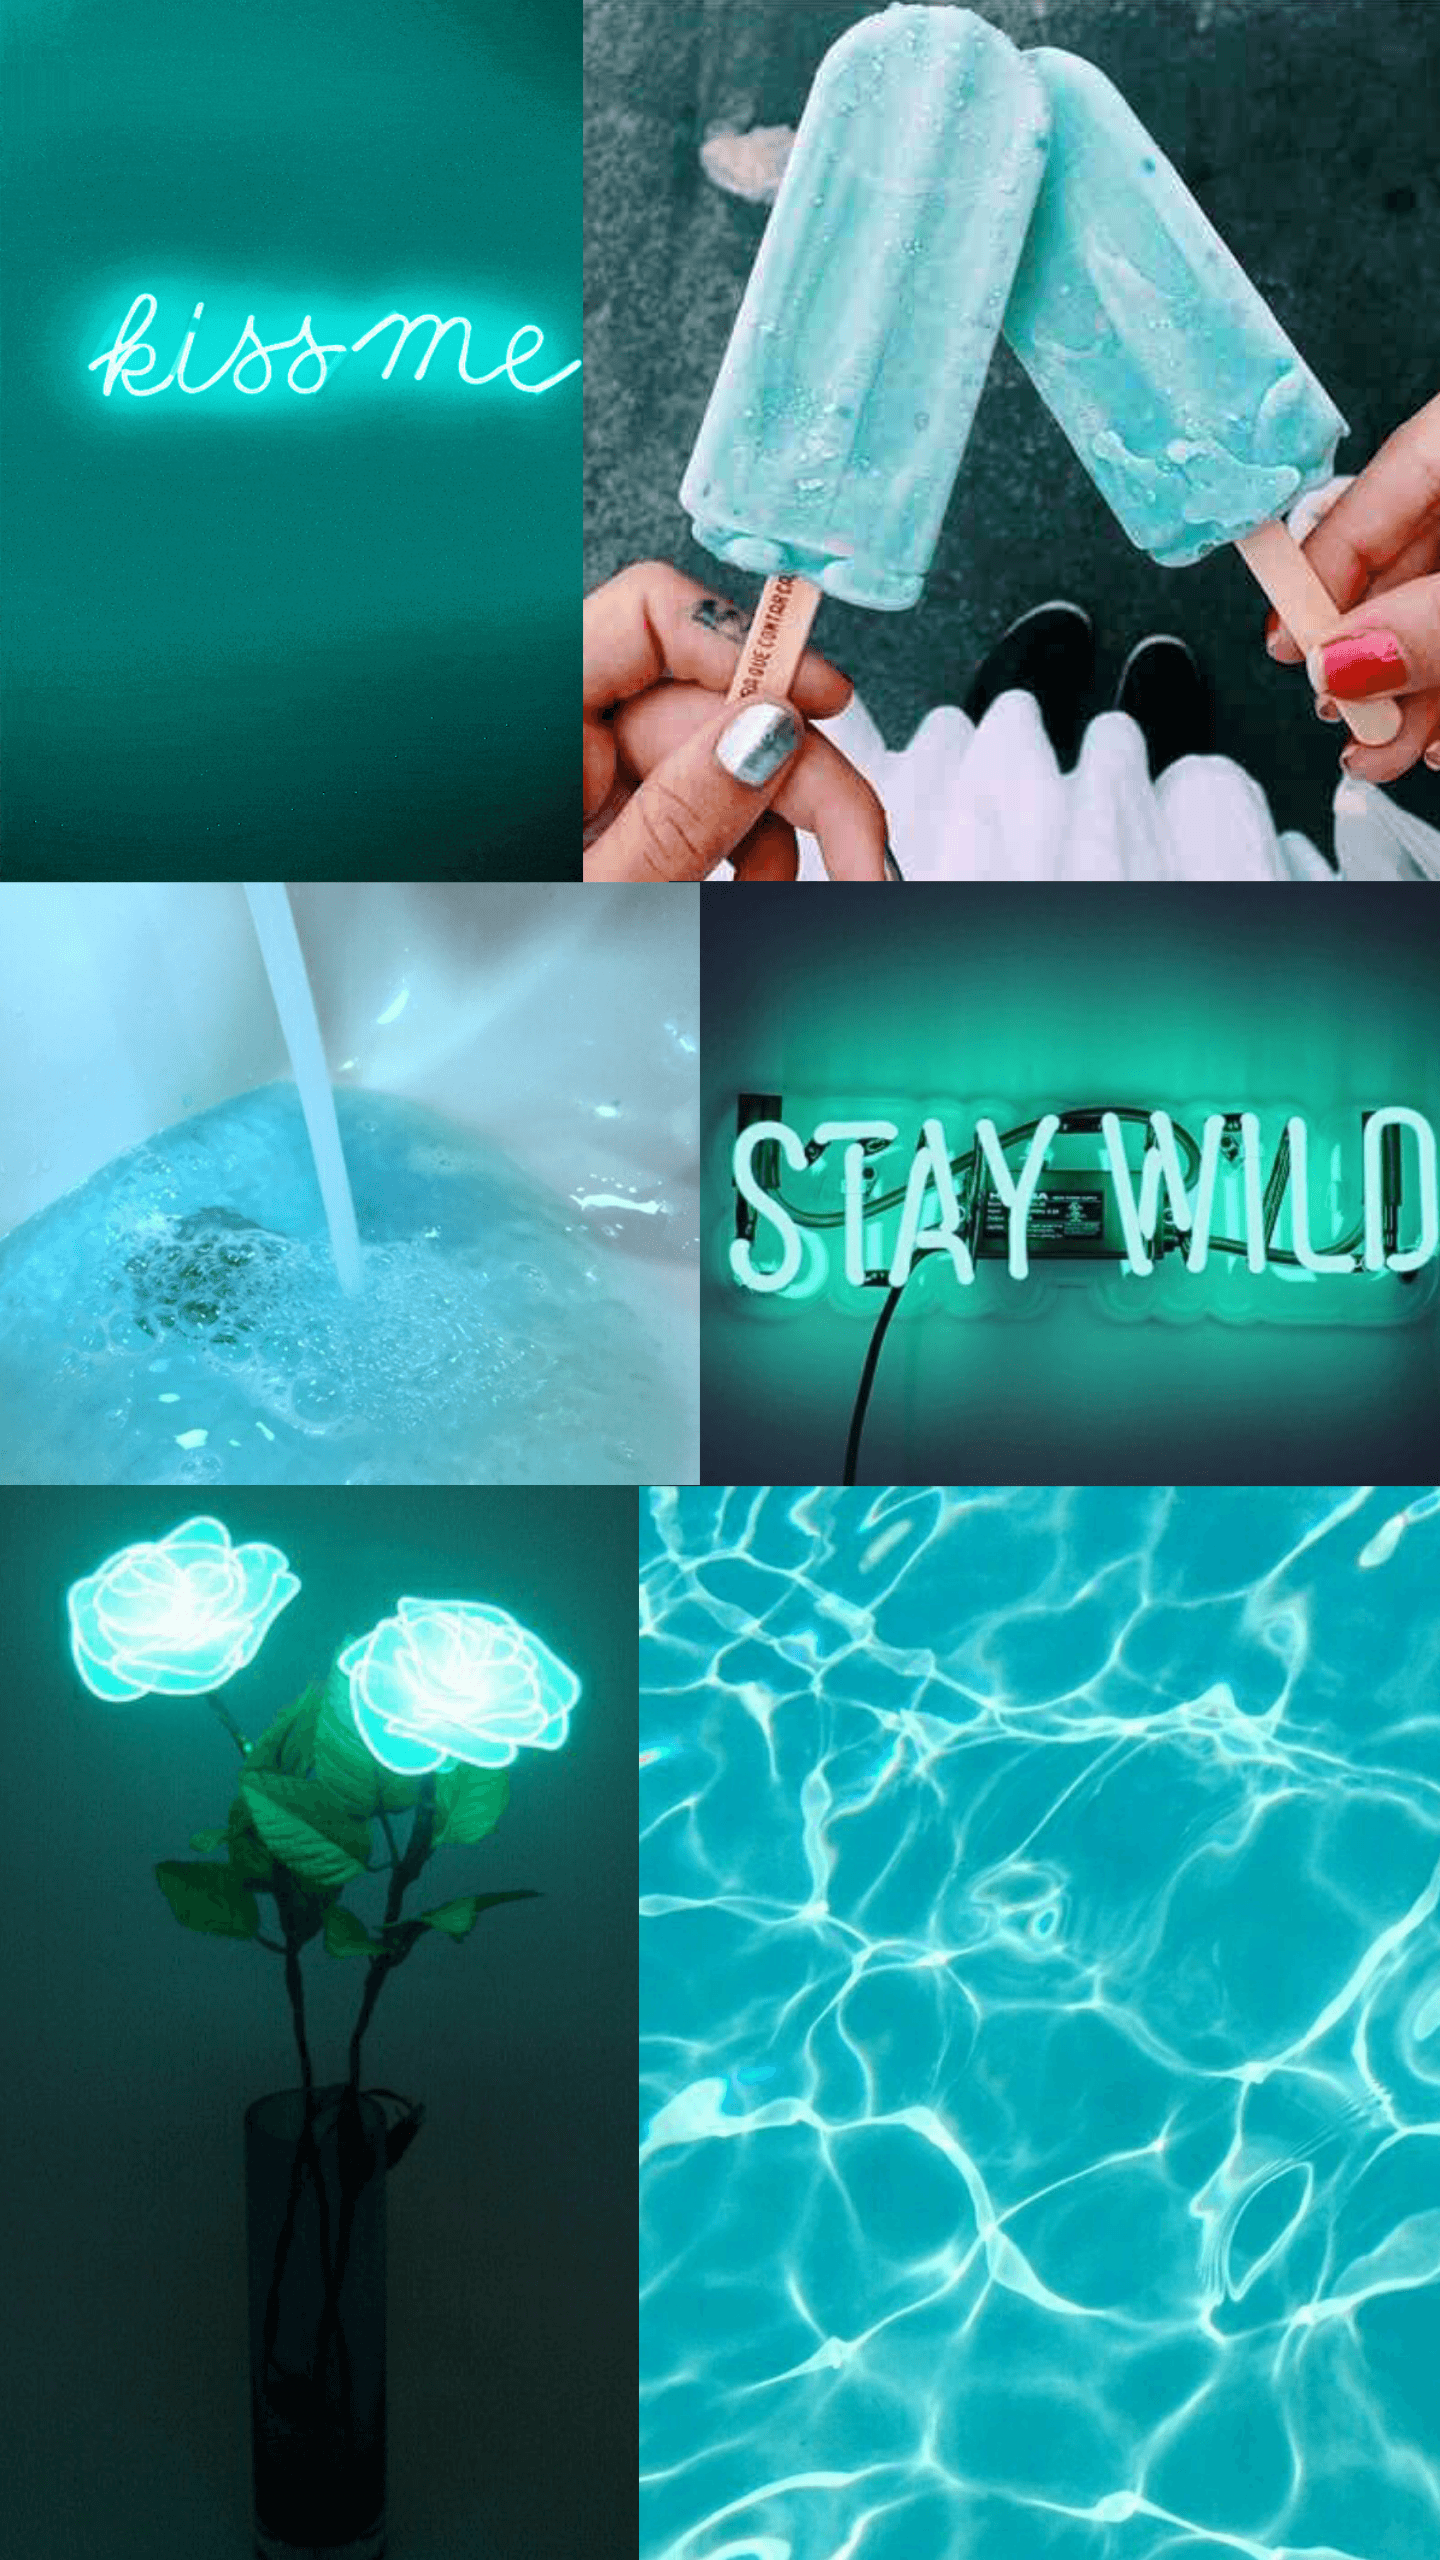 A collage of pictures with neon signs - Teal, turquoise